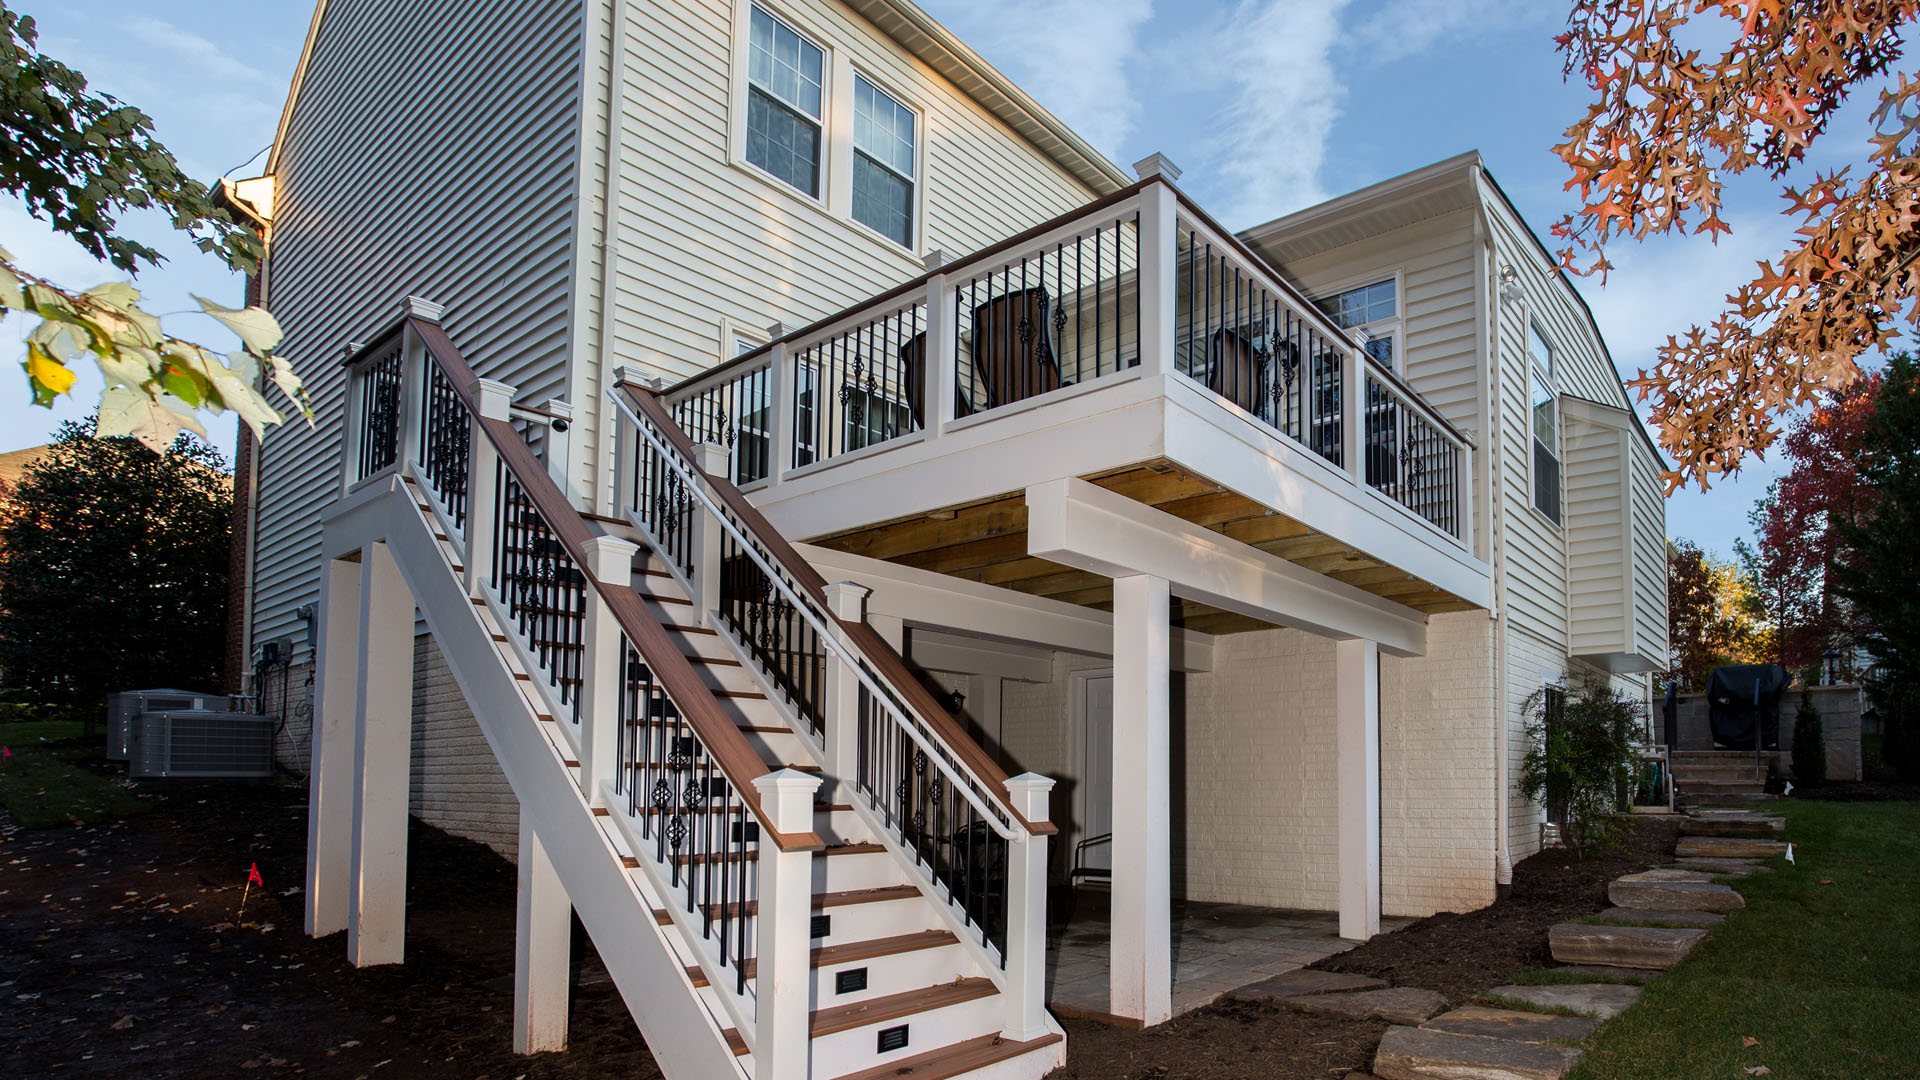 2015 NARI Capital CotY Finalist Award Winner, Residential Addition $100,000 to $250,000